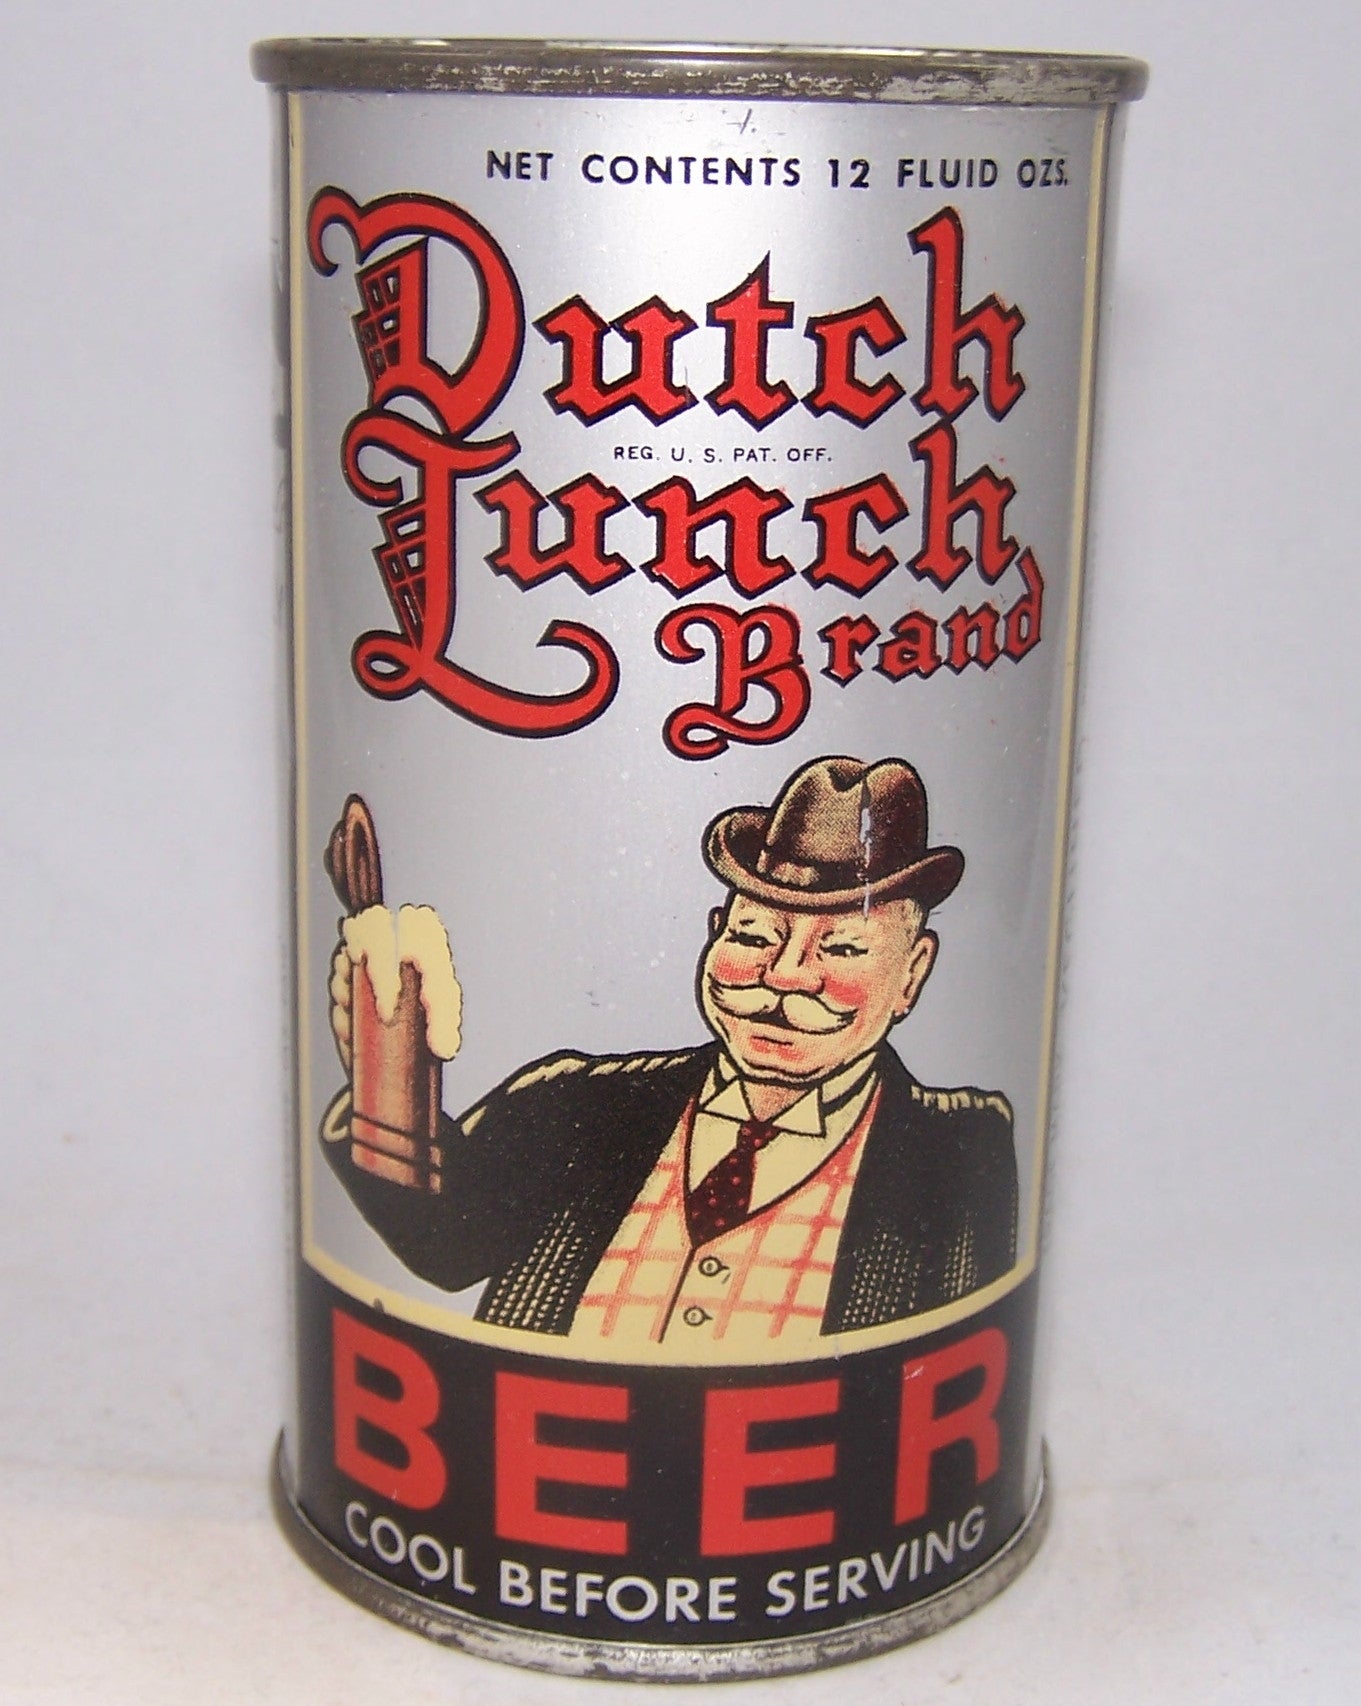 Dutch Lunch Brand Beer, Lilek page # 214, Grade 1 to 1/1+ Sold on 08/24/17